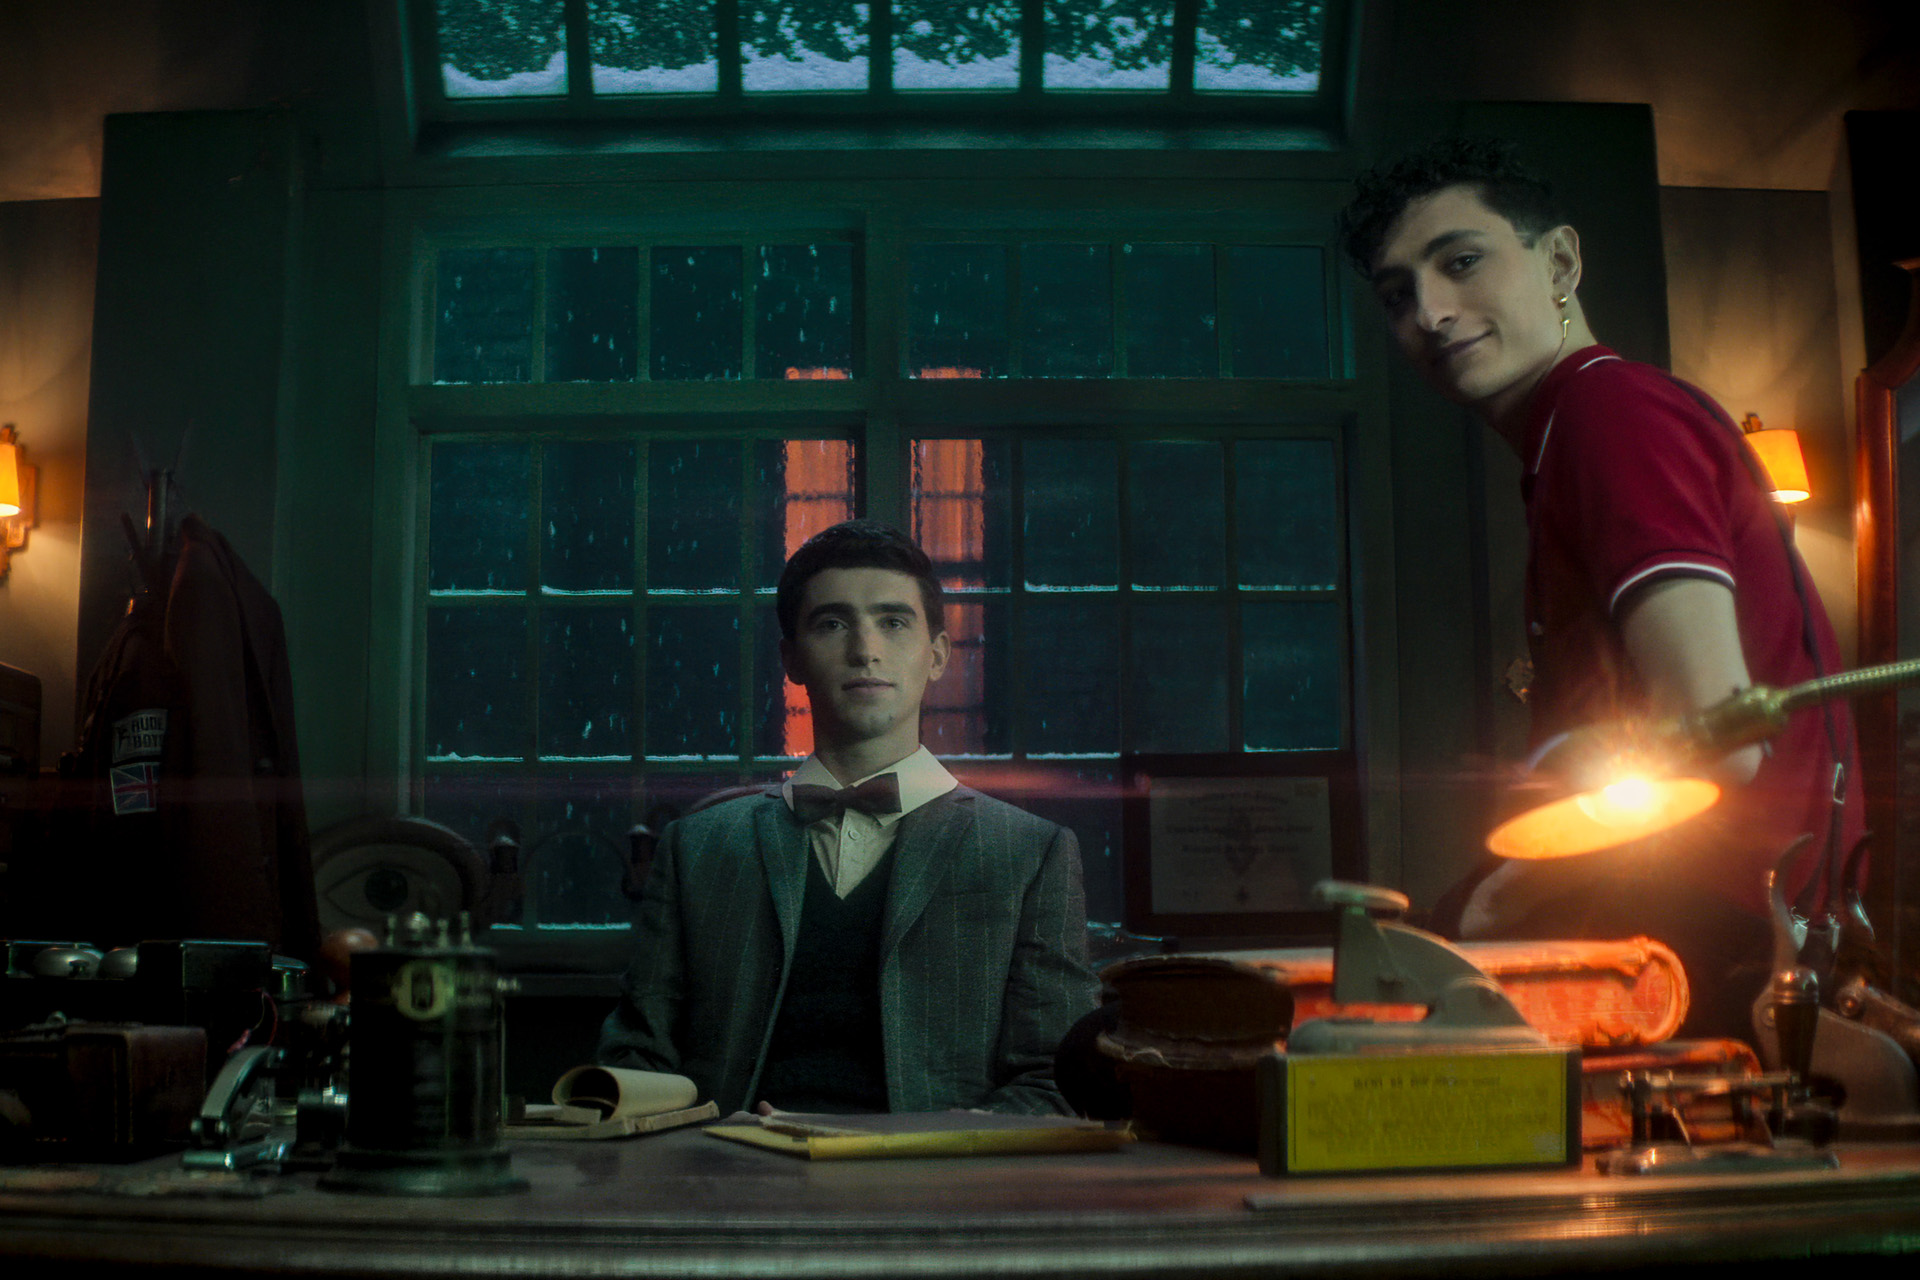 (L-R) George Rexstrew as Edwin Payne and Jayden Revri as Charles Rowland in episode 101 in DEAD BOY DETECTIVES